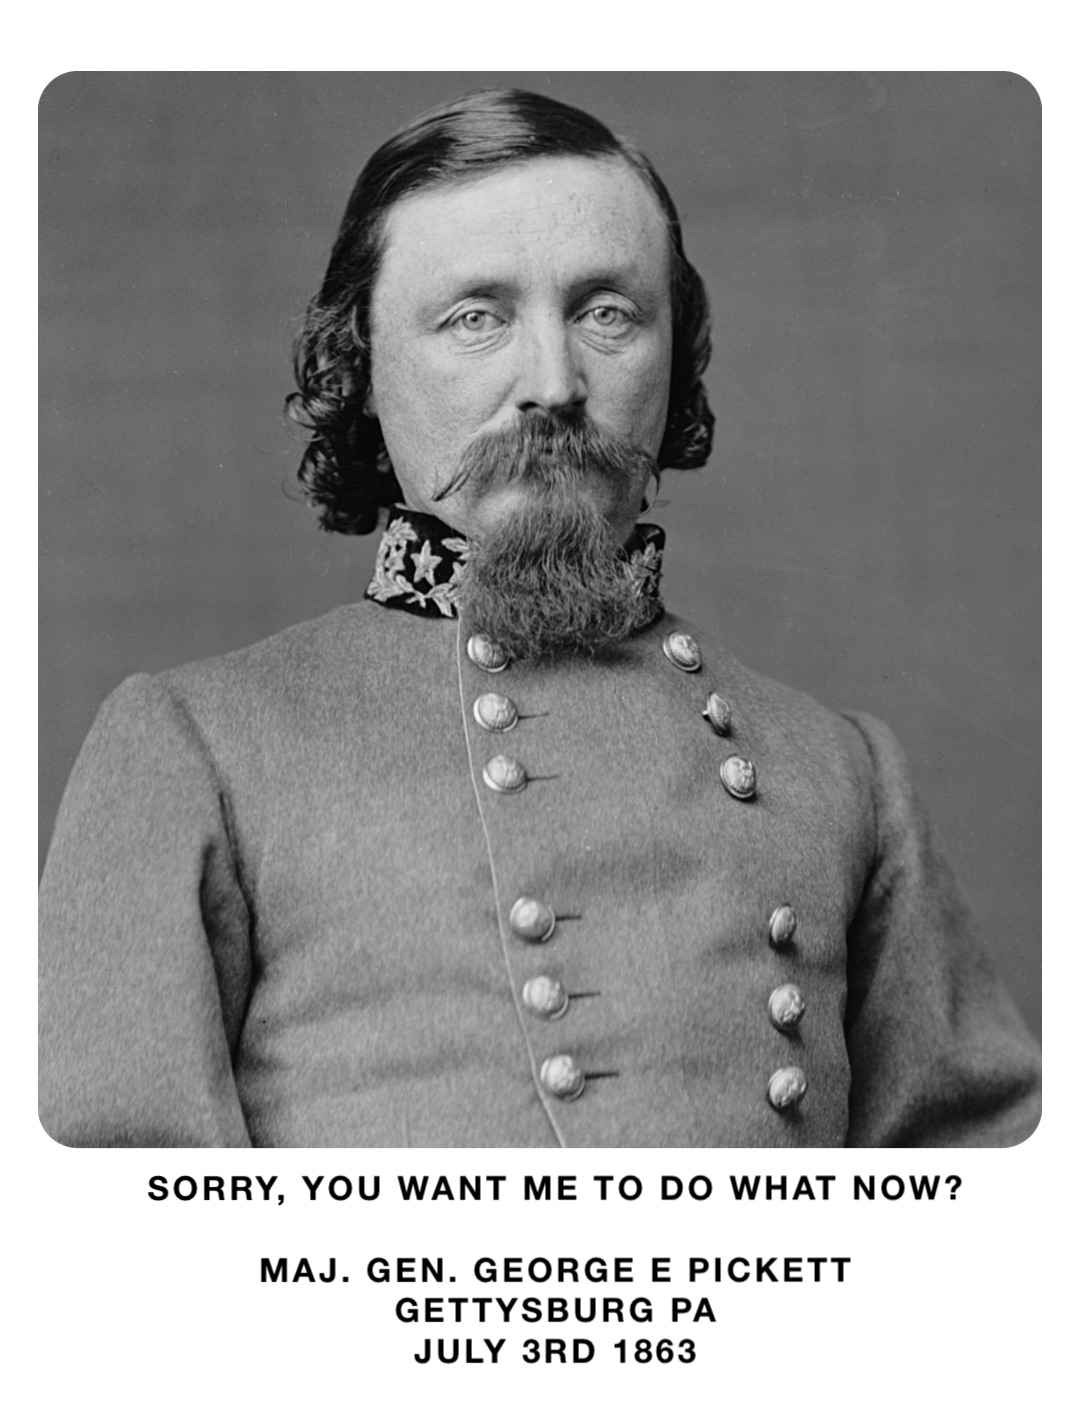 Sorry, you want me to do what now?

MAJ. GEN. George E Pickett
Gettysburg Pa
July 3rd 1863